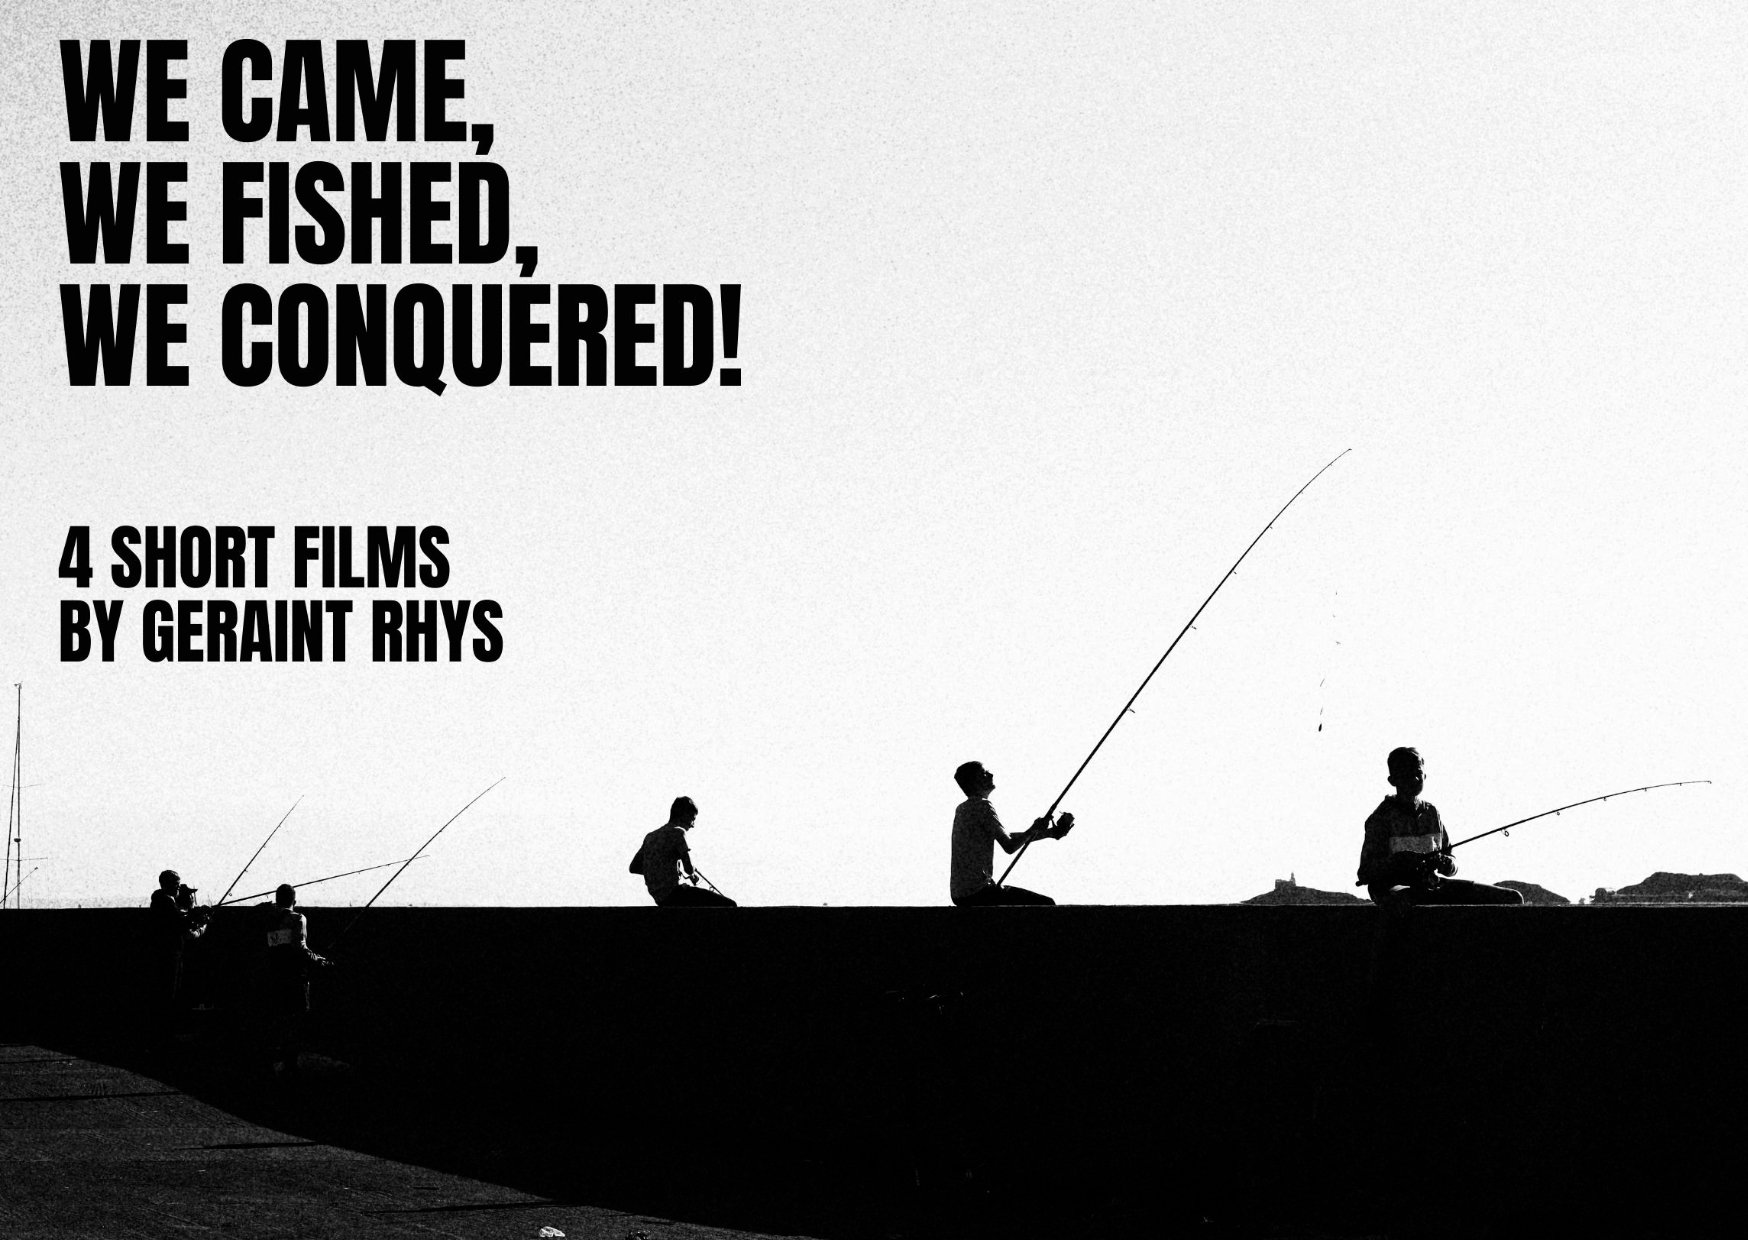 We came, we fished, we conquered image by Geraint Rhys